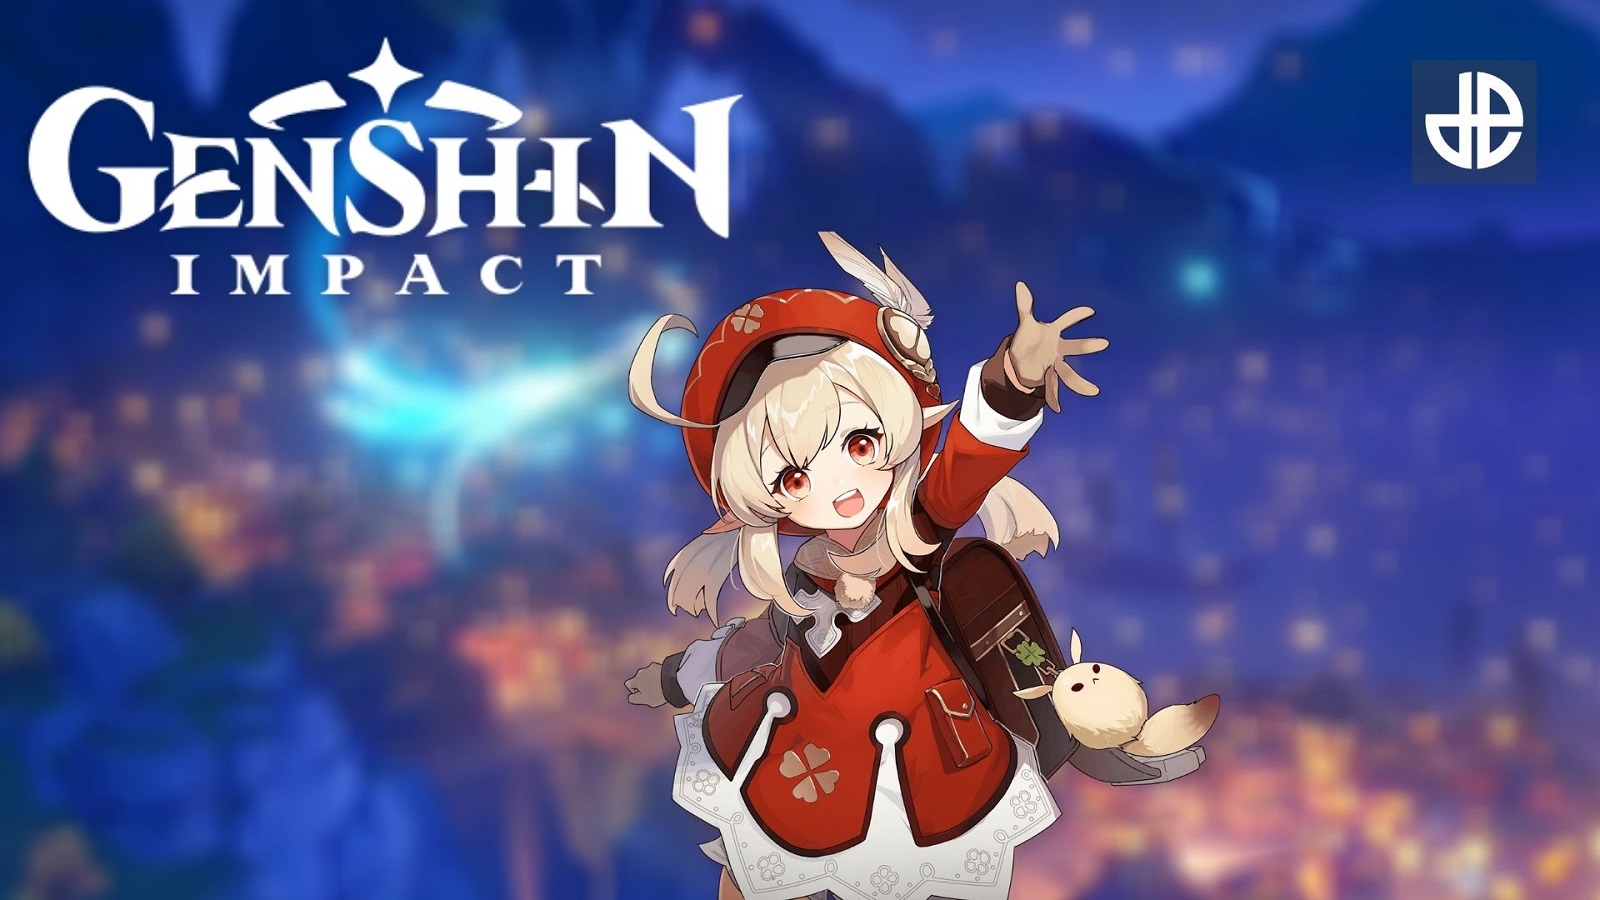 Genshin Impact' Update to Add 4 New Characters and Reputation System